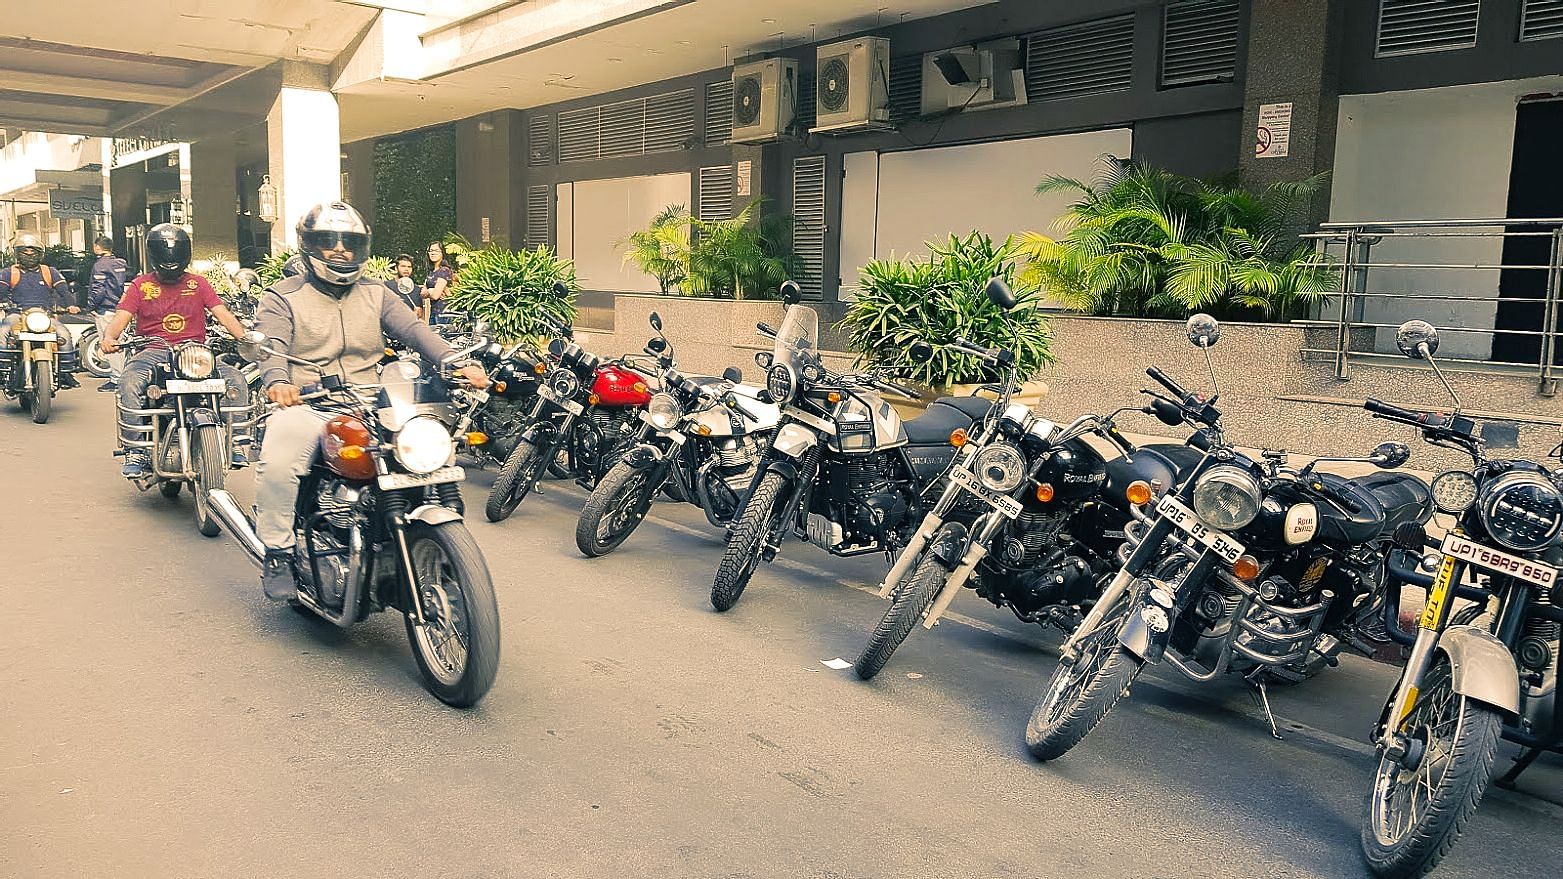 More than 300 bikers took part in Royal Enfield’s Delhi edition of One Ride 2019.